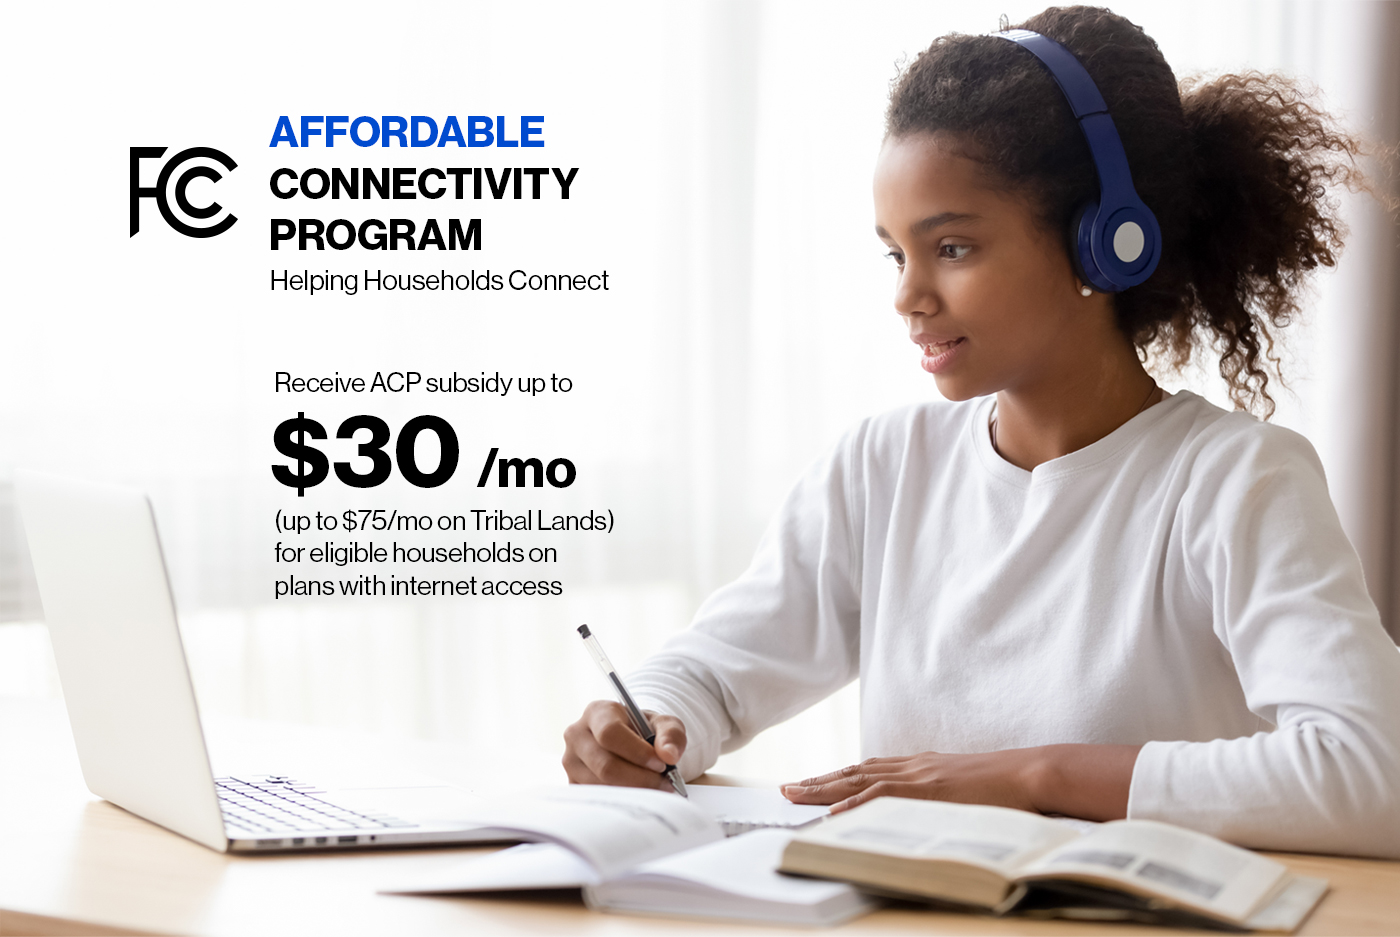 ACP FCC Affordable Connectivity Program $30 monthly Internet Subsidy for Eligible Households and Families